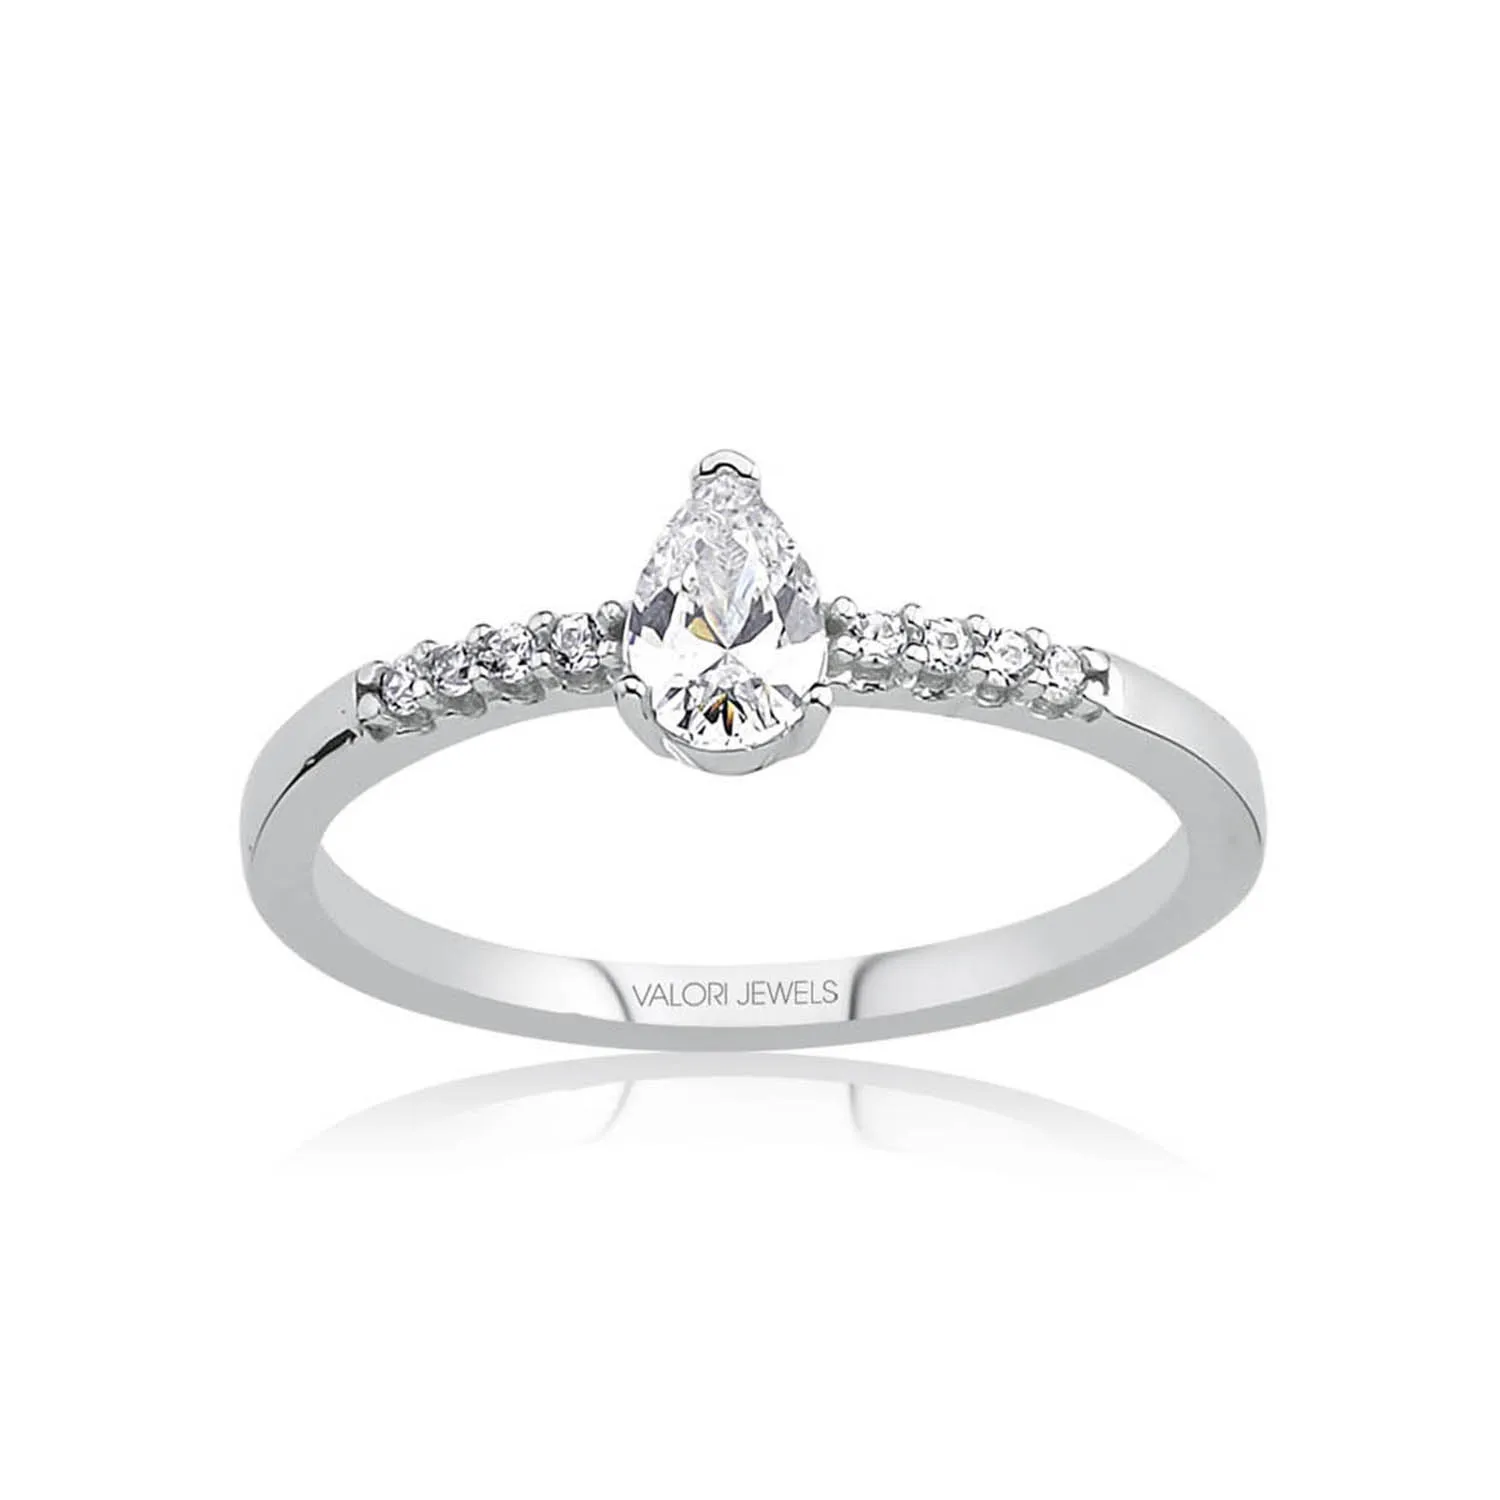 

Valori Jewels 0.33 Carat, Zirconia White Pear Gemstone, Rhodium Plated, Sterling Silver Solitaire Ring